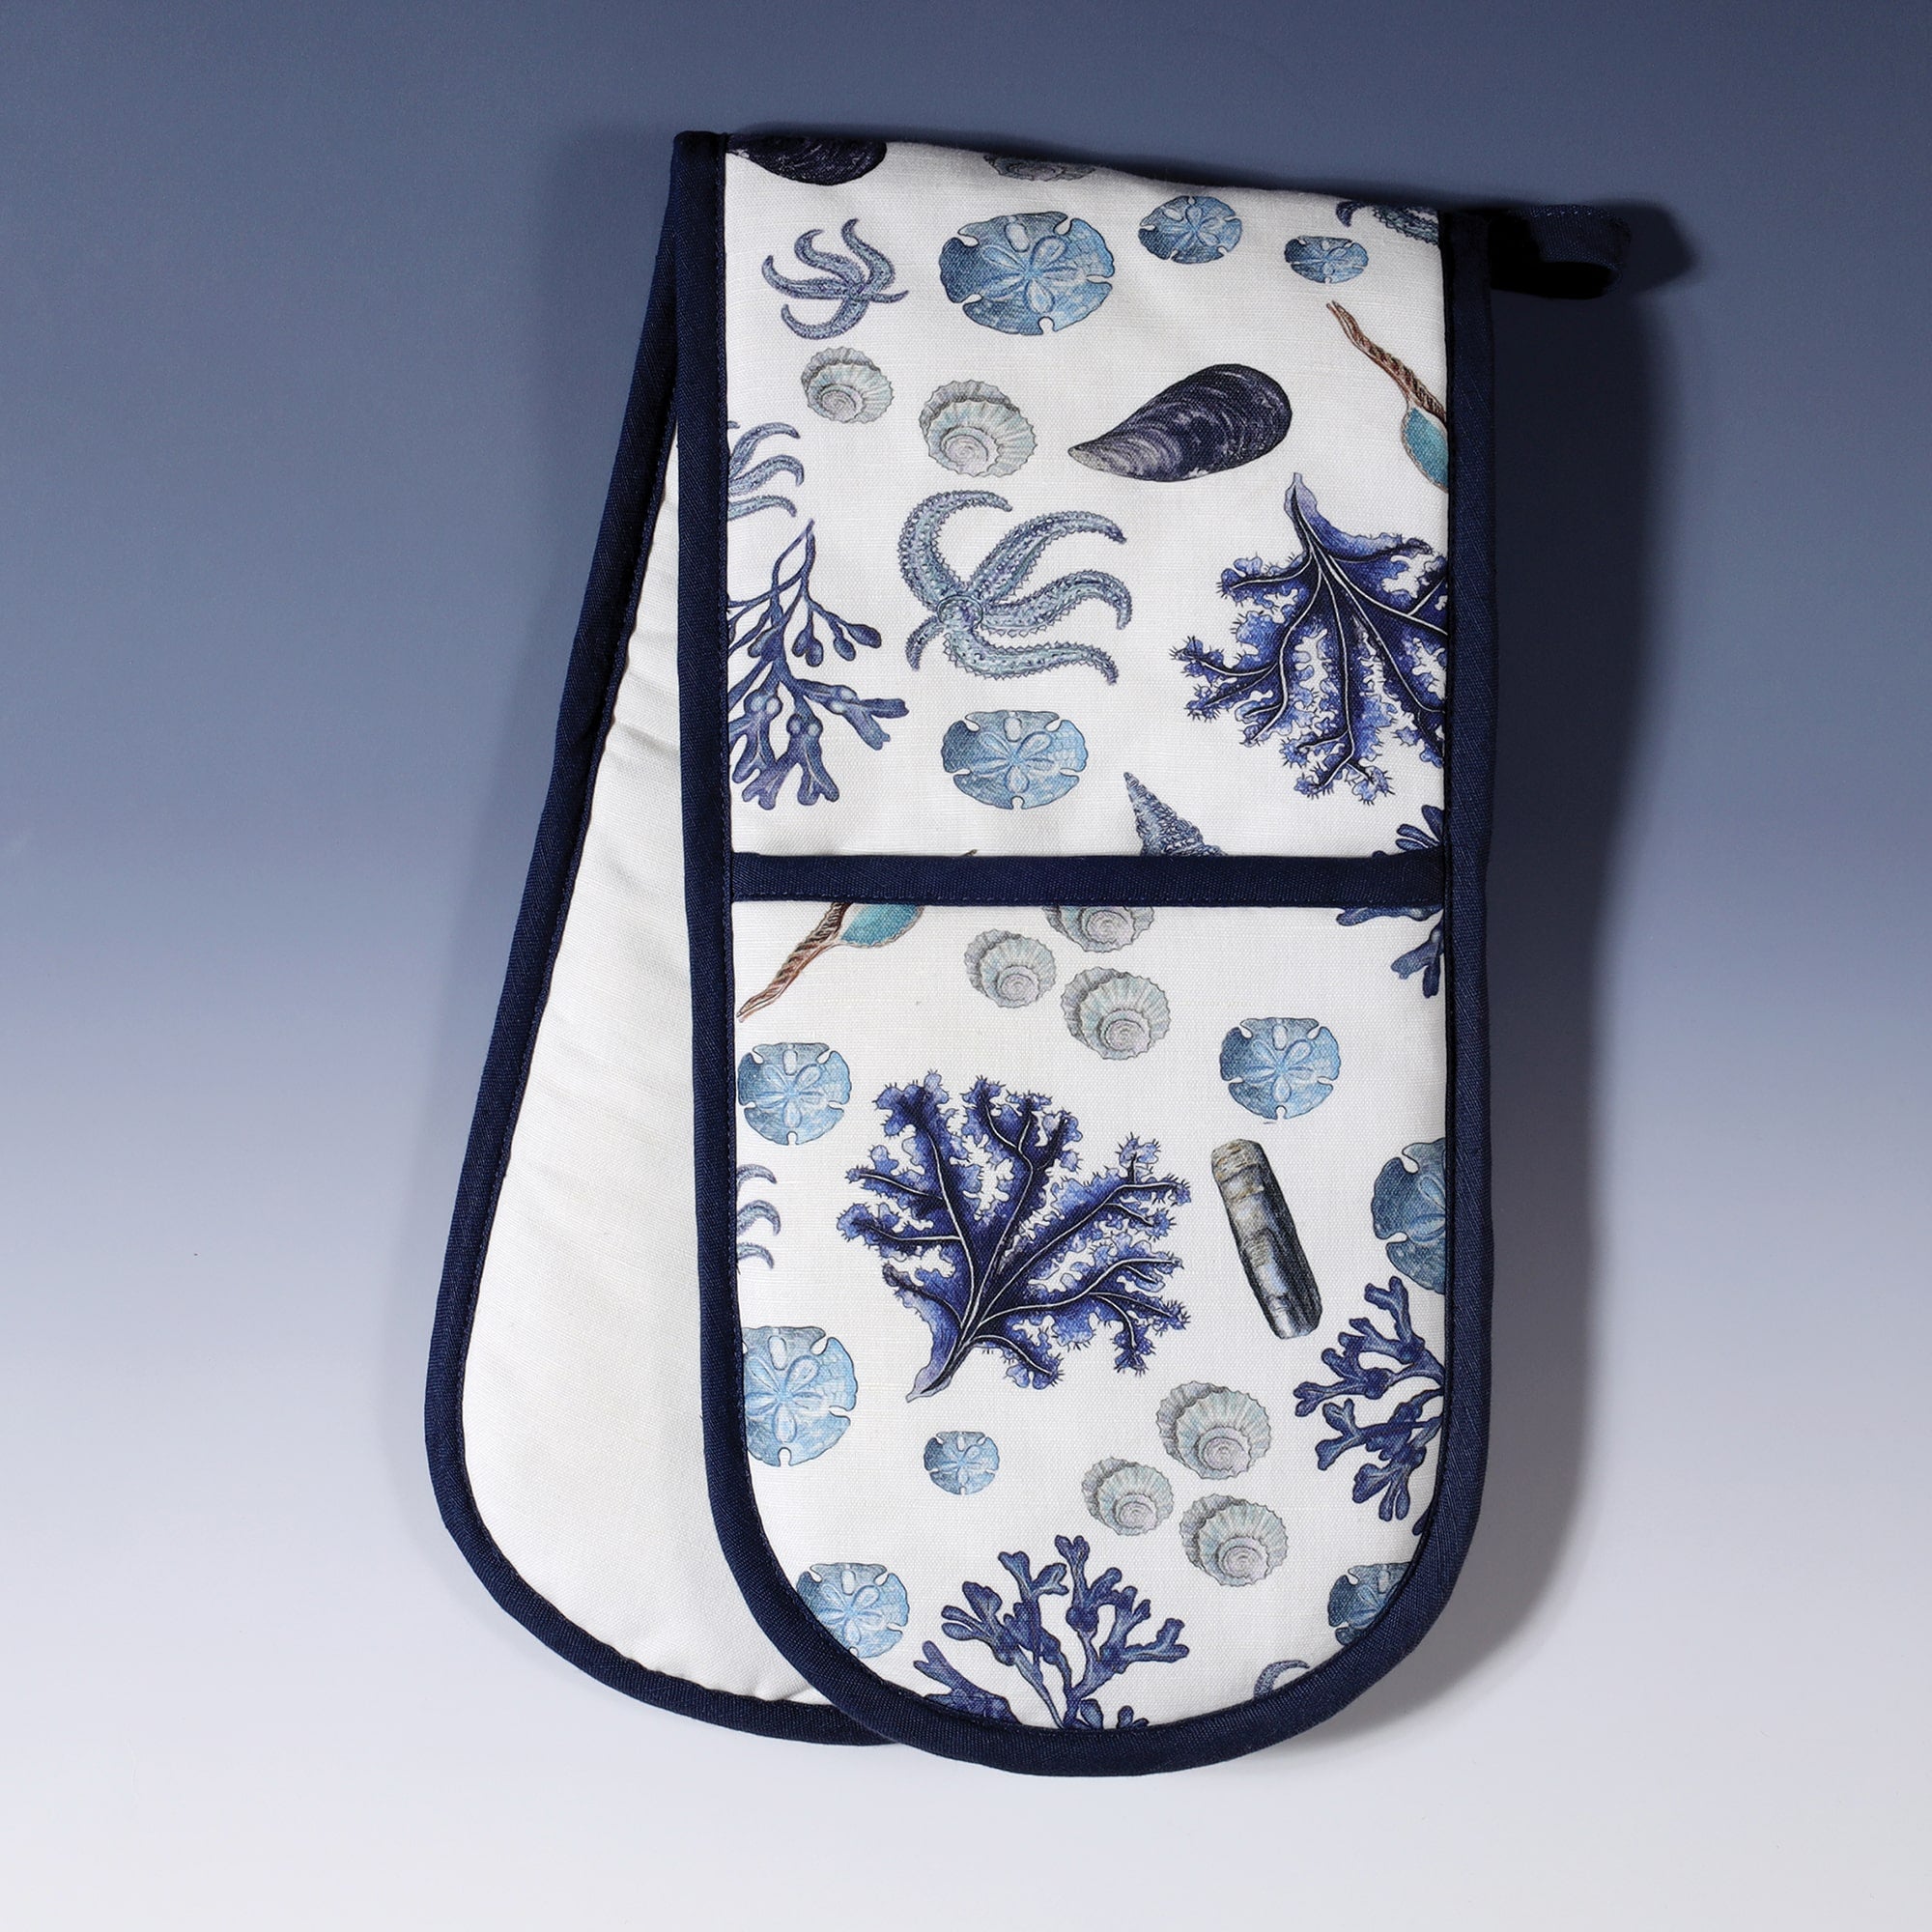 Oven gloves with all over design of sea shells and seaweed in blues on white background with a navy trim in our beachcomber design